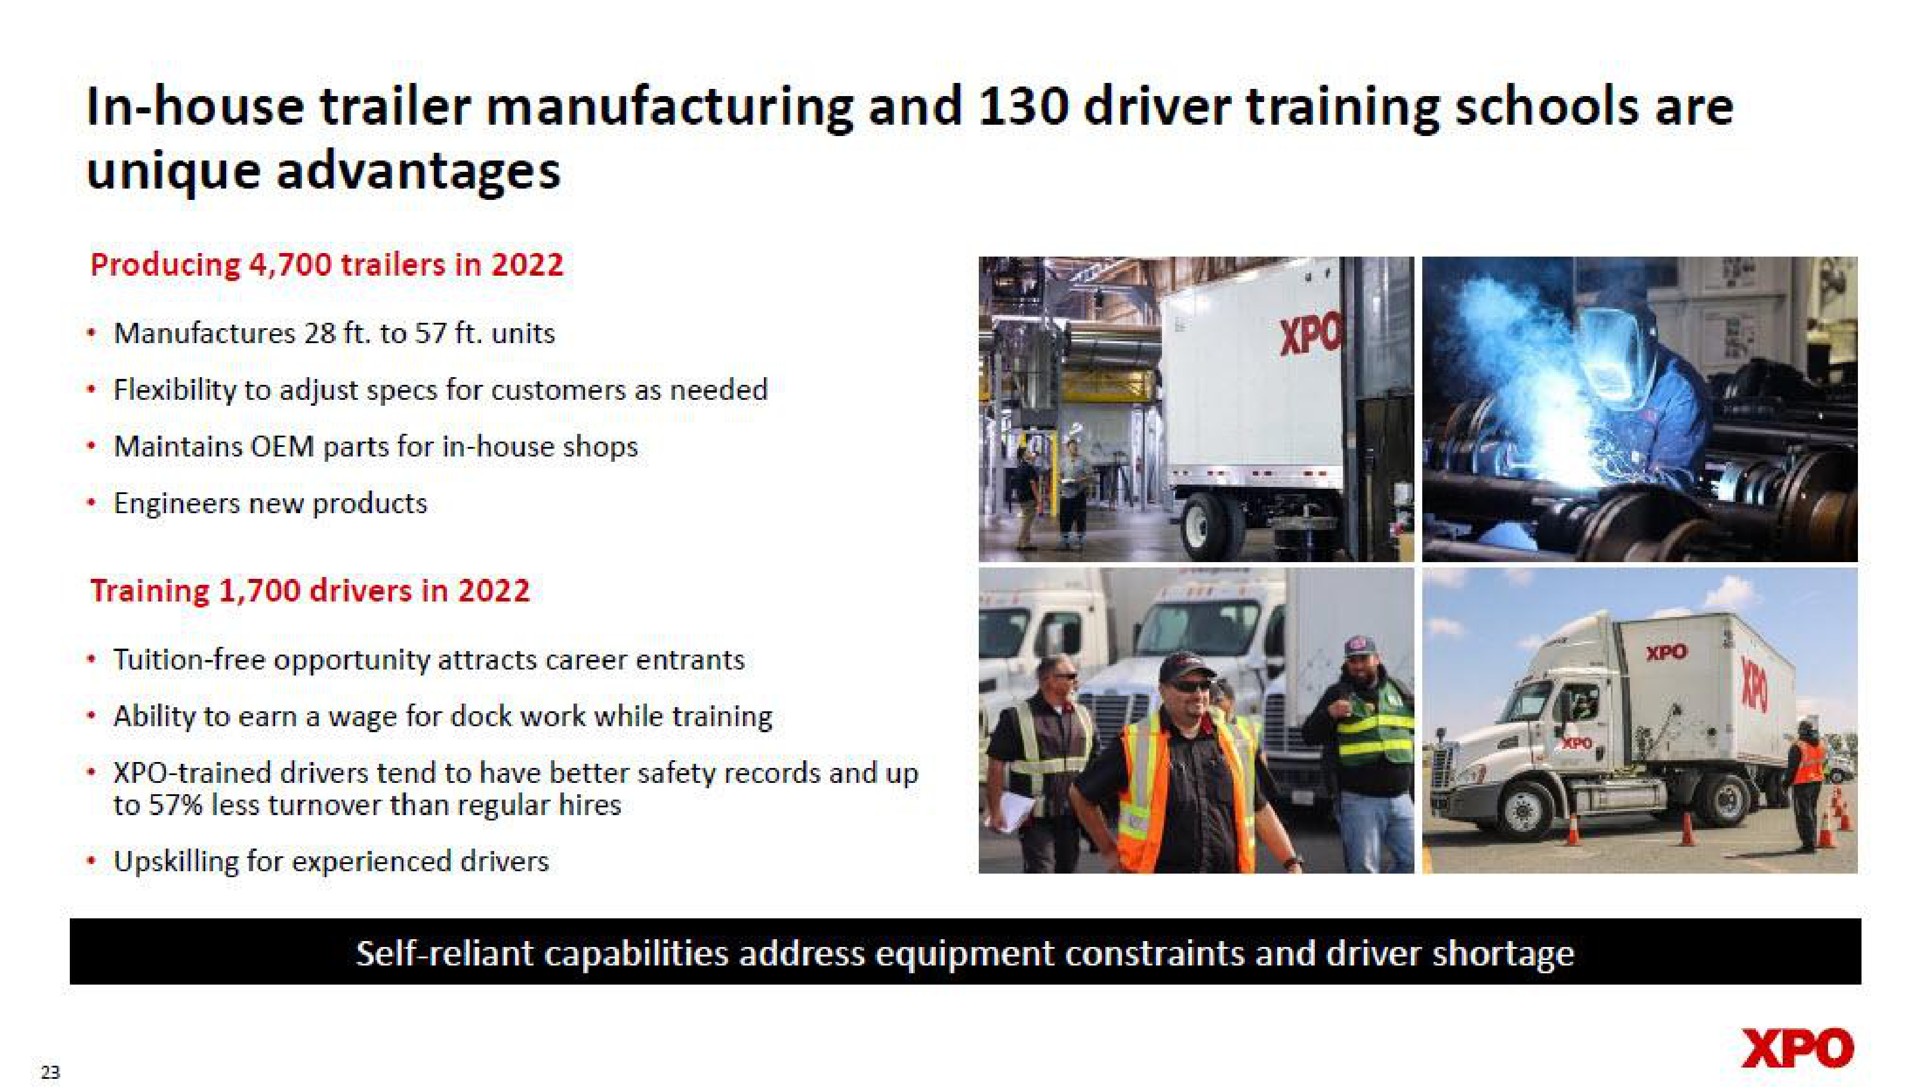 in house trailer manufacturing and driver training schools are unique advantages | XPO Logistics